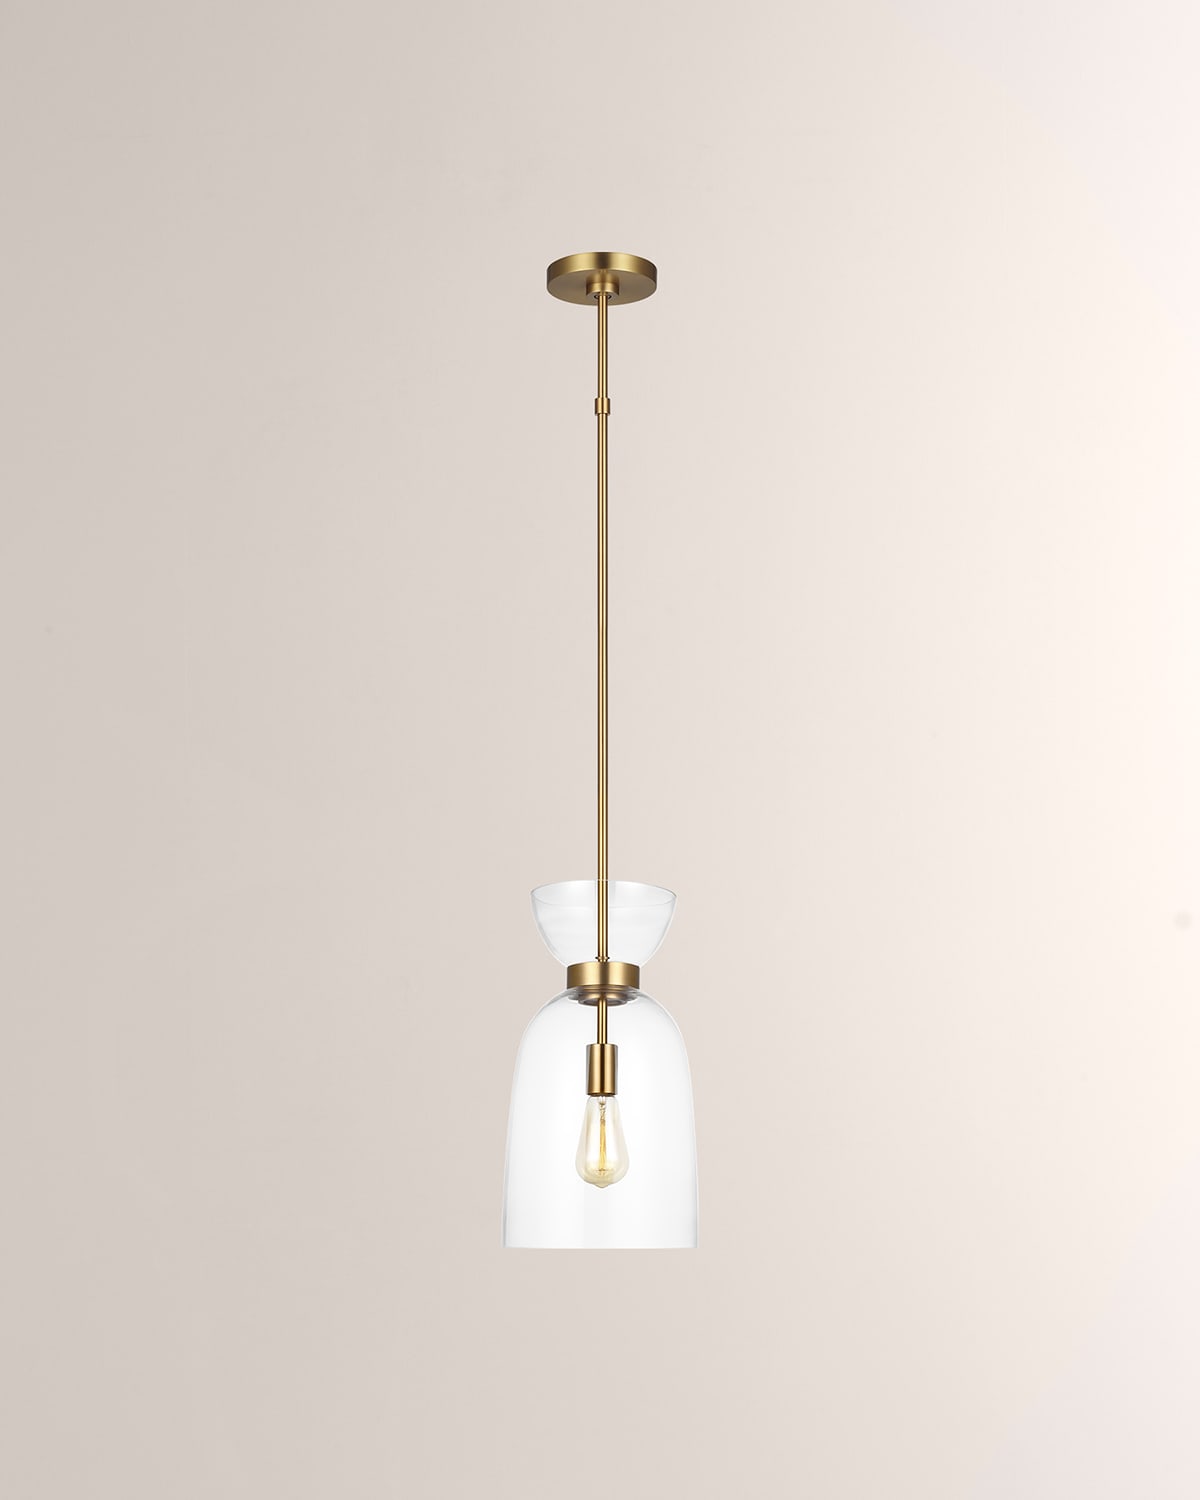 Visual Comfort Signature Piatto Large Pendant In Hand-Rubbed Antique Brass  With Plaster White Shade By Thomas O'Brien